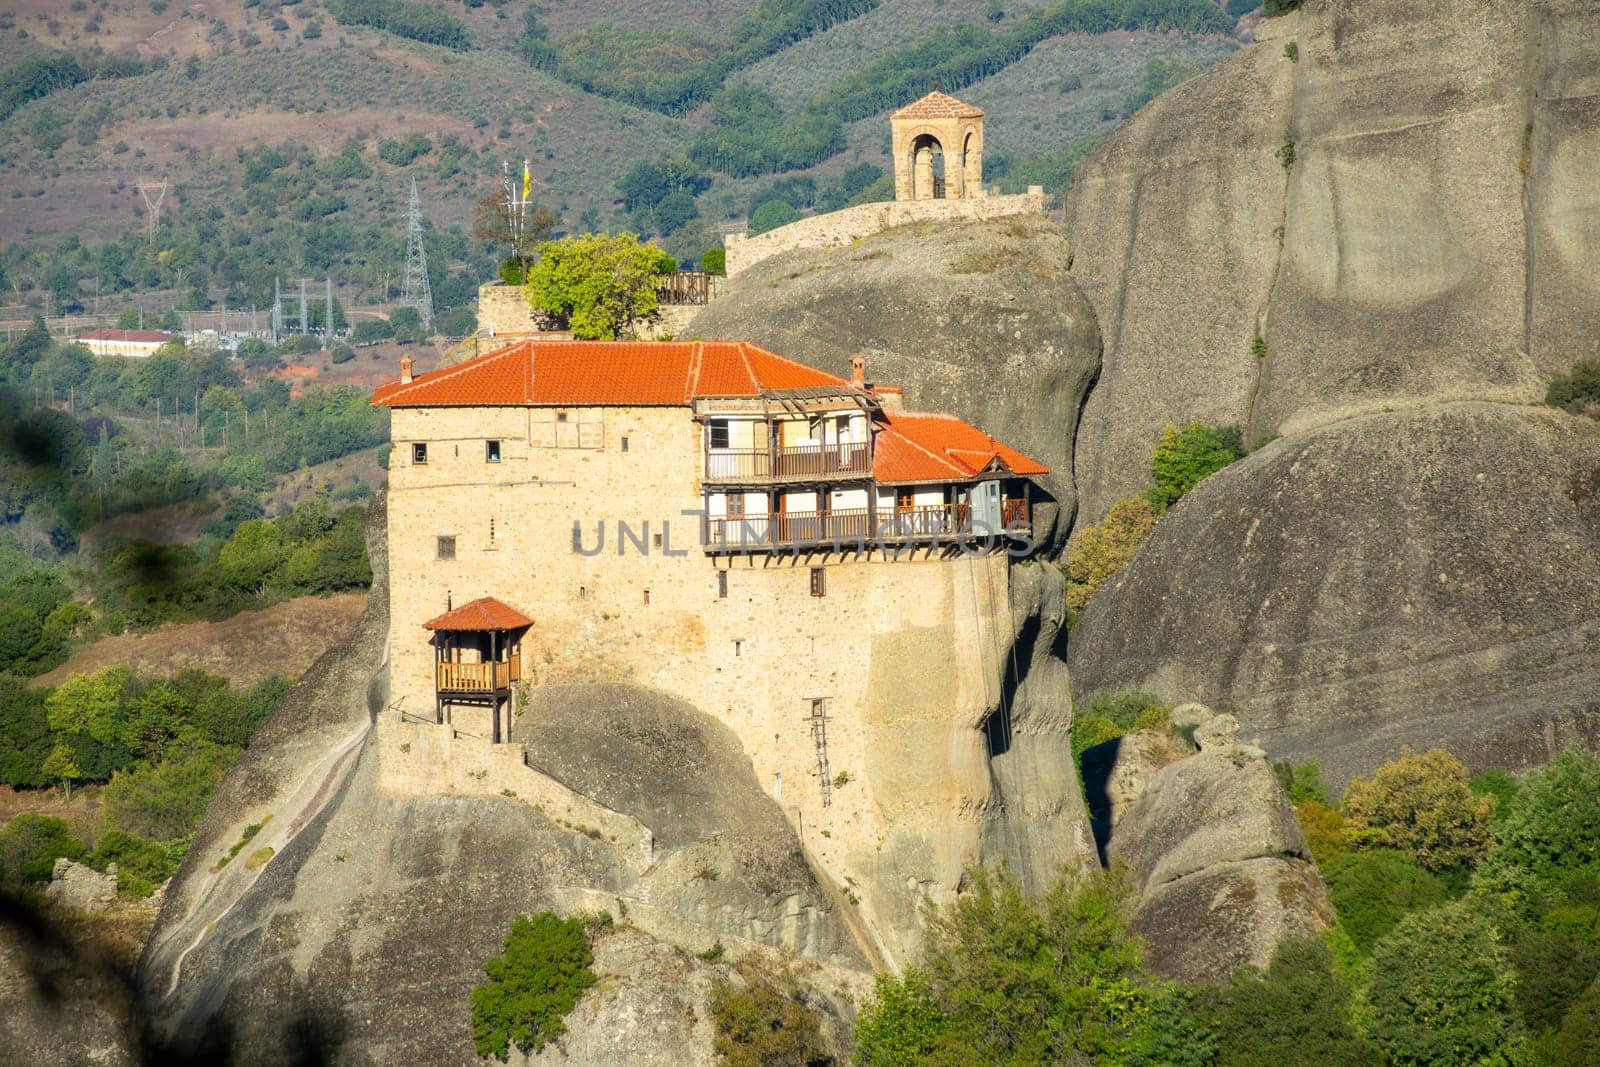 Greece. Sunny summer day in Kalambaka. A small monastery with red roofs on a cliff and a cable car